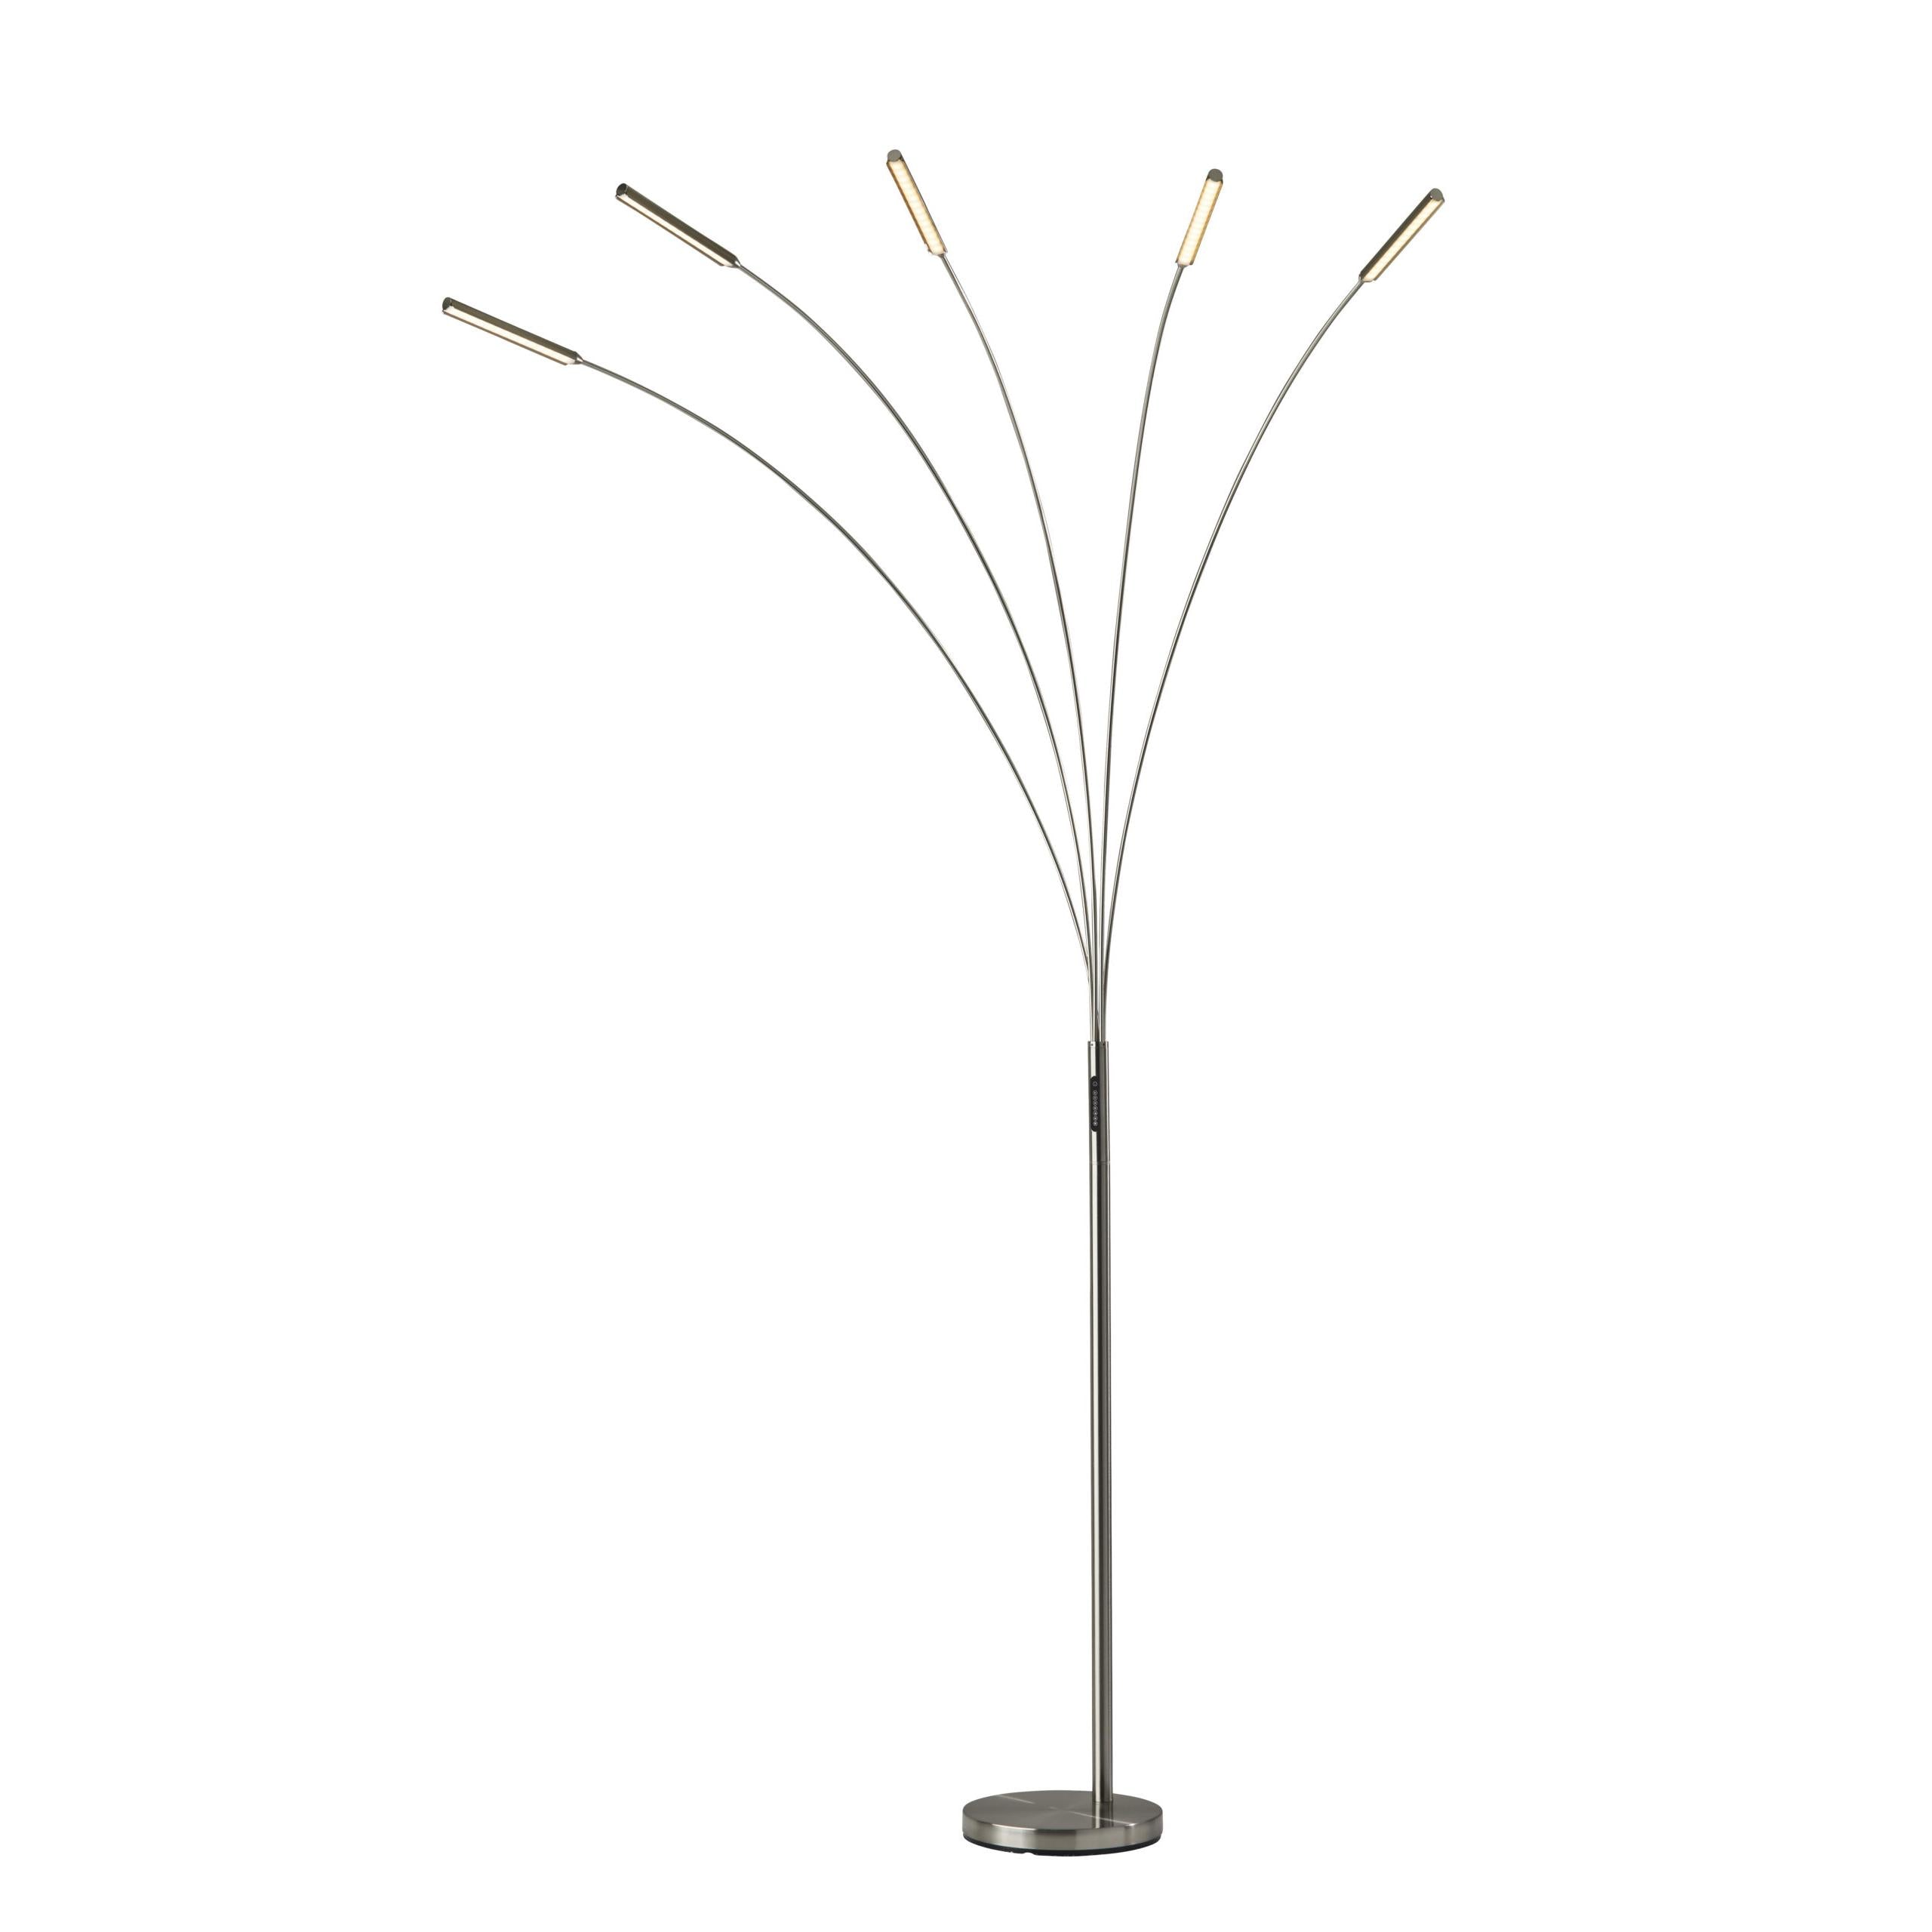 ZODIAC Floor lamp Stainless steel INTEGRATED LED - 2131-22 | ADESSO